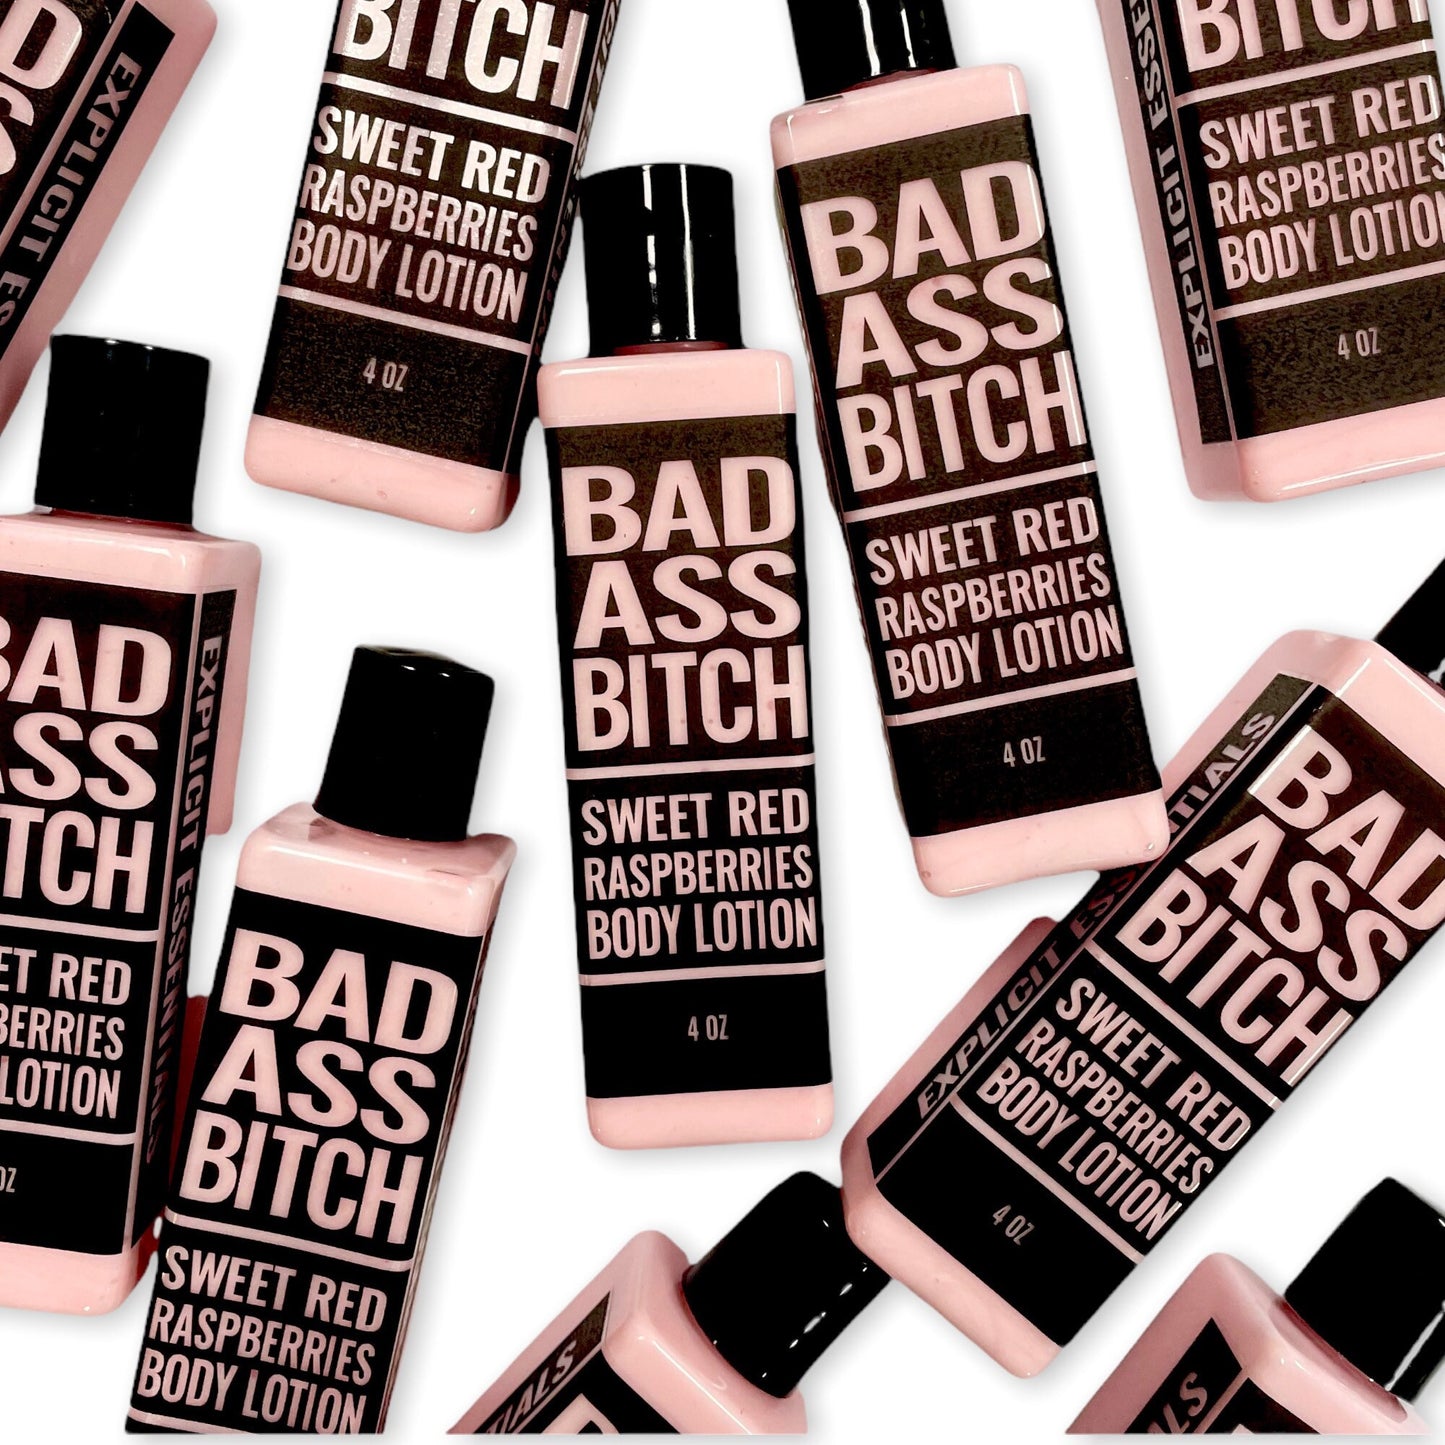 Bad Ass Bitch Hand & Body Lotion